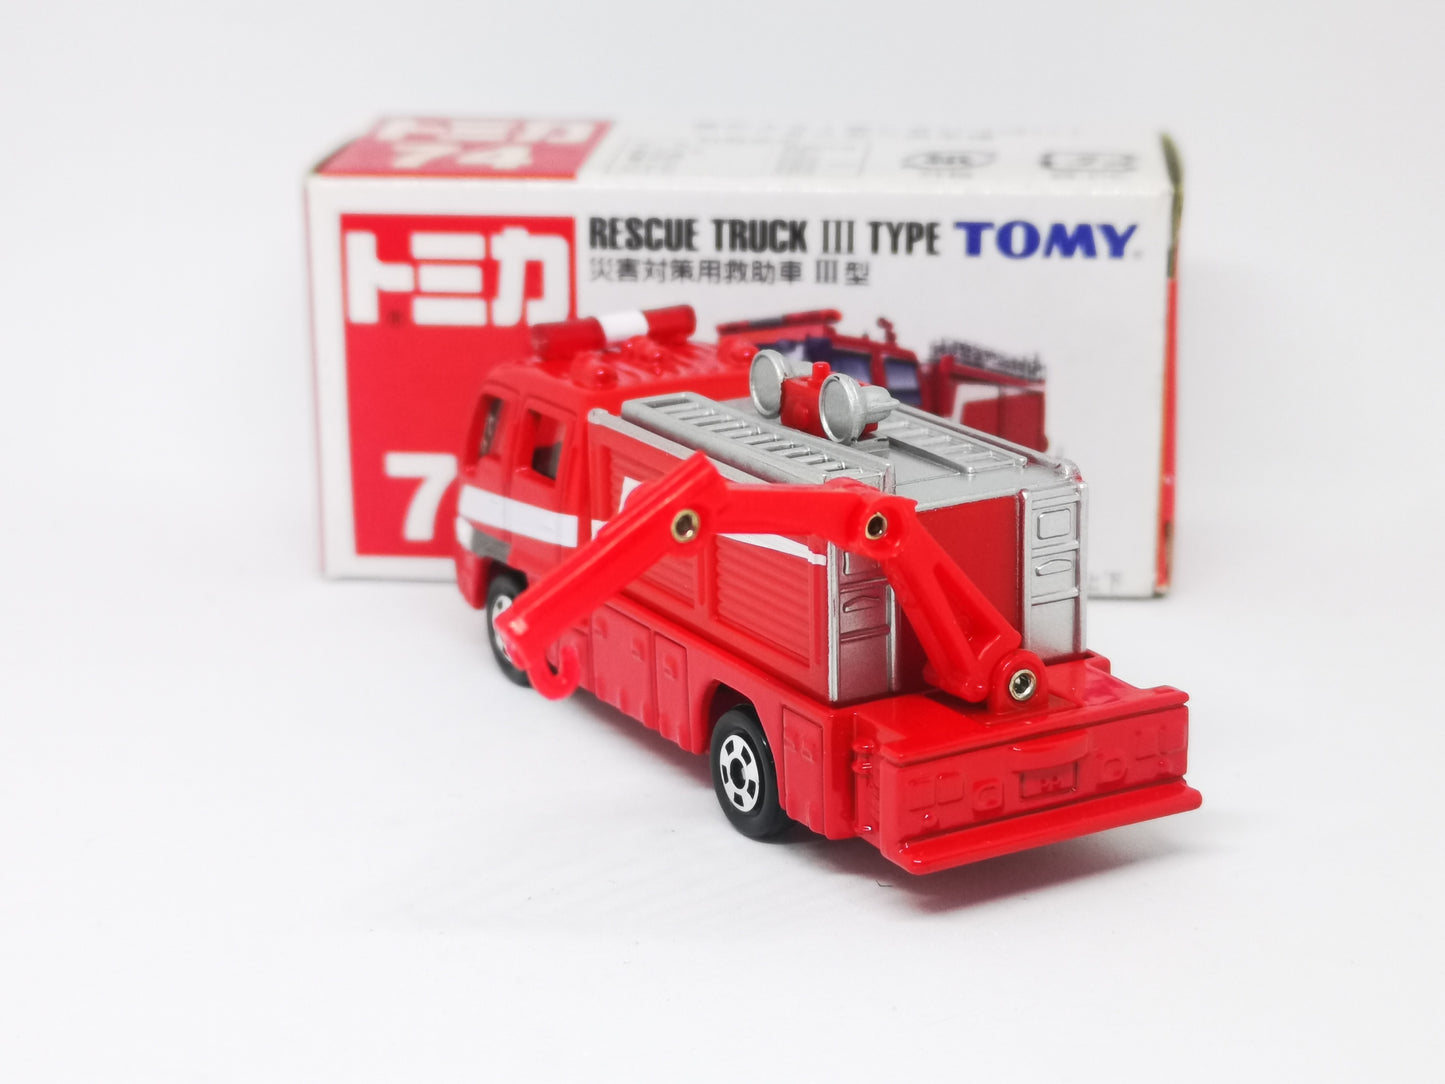 Tomica No.74 Japan Fire Engine Rescue Truck III Type